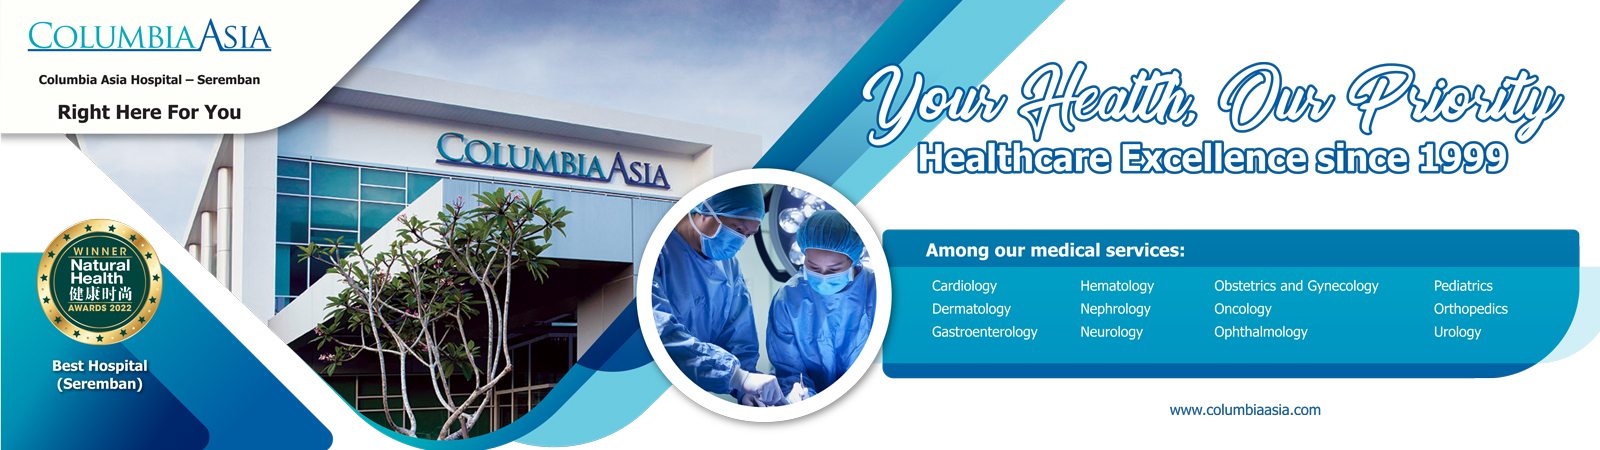 Columbia Asia Hospital – Seremban: More than Two Decades of Excellence